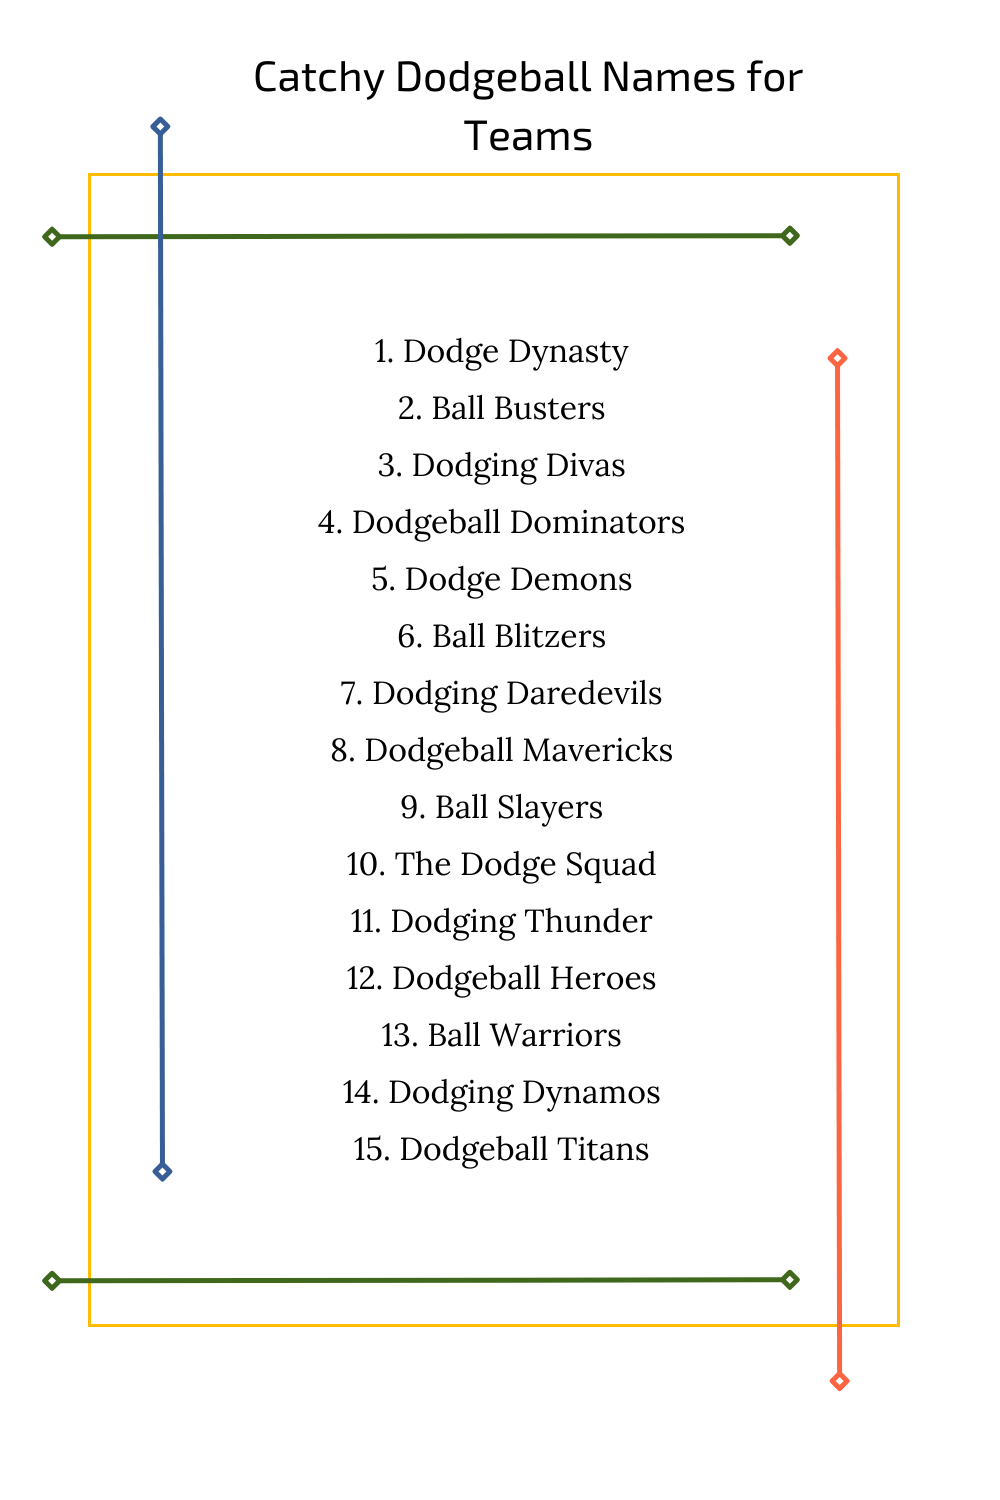 Catchy Dodgeball Names for Teams